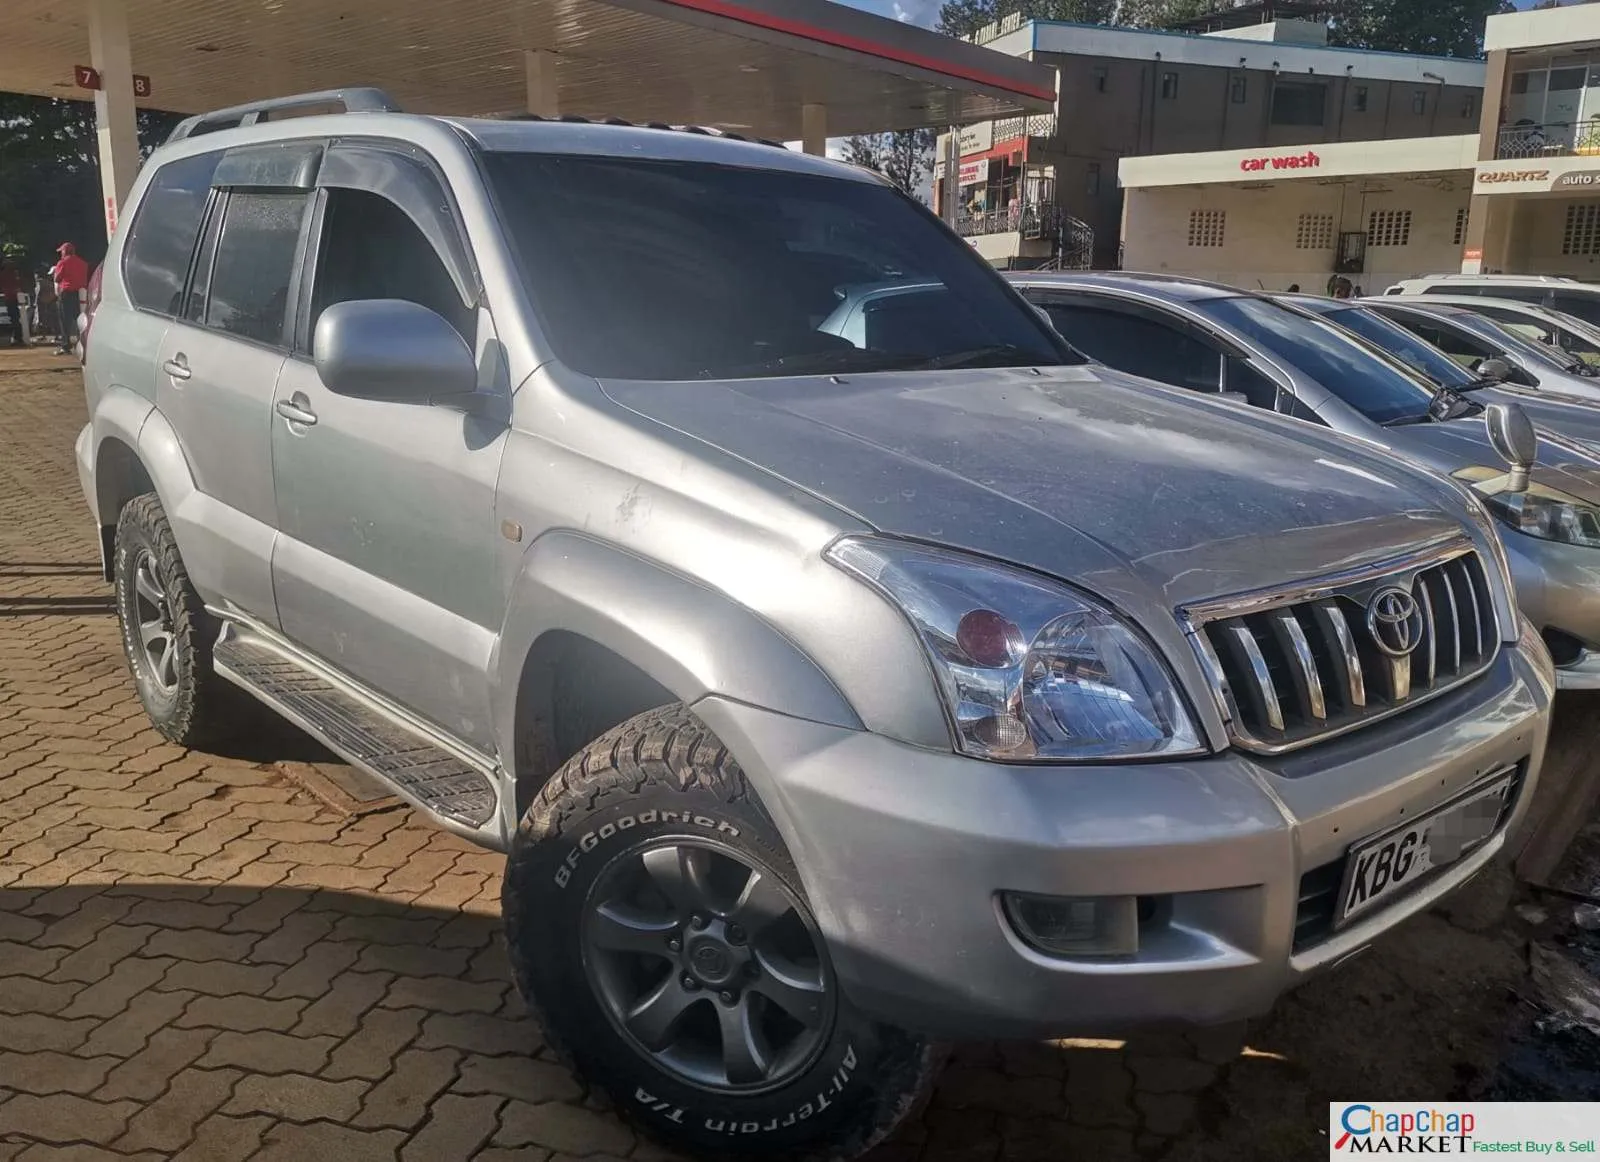 Toyota Prado J120 with SUNROOF 1.39M You Pay 40% Deposit Trade in OK EXCLUSIVE